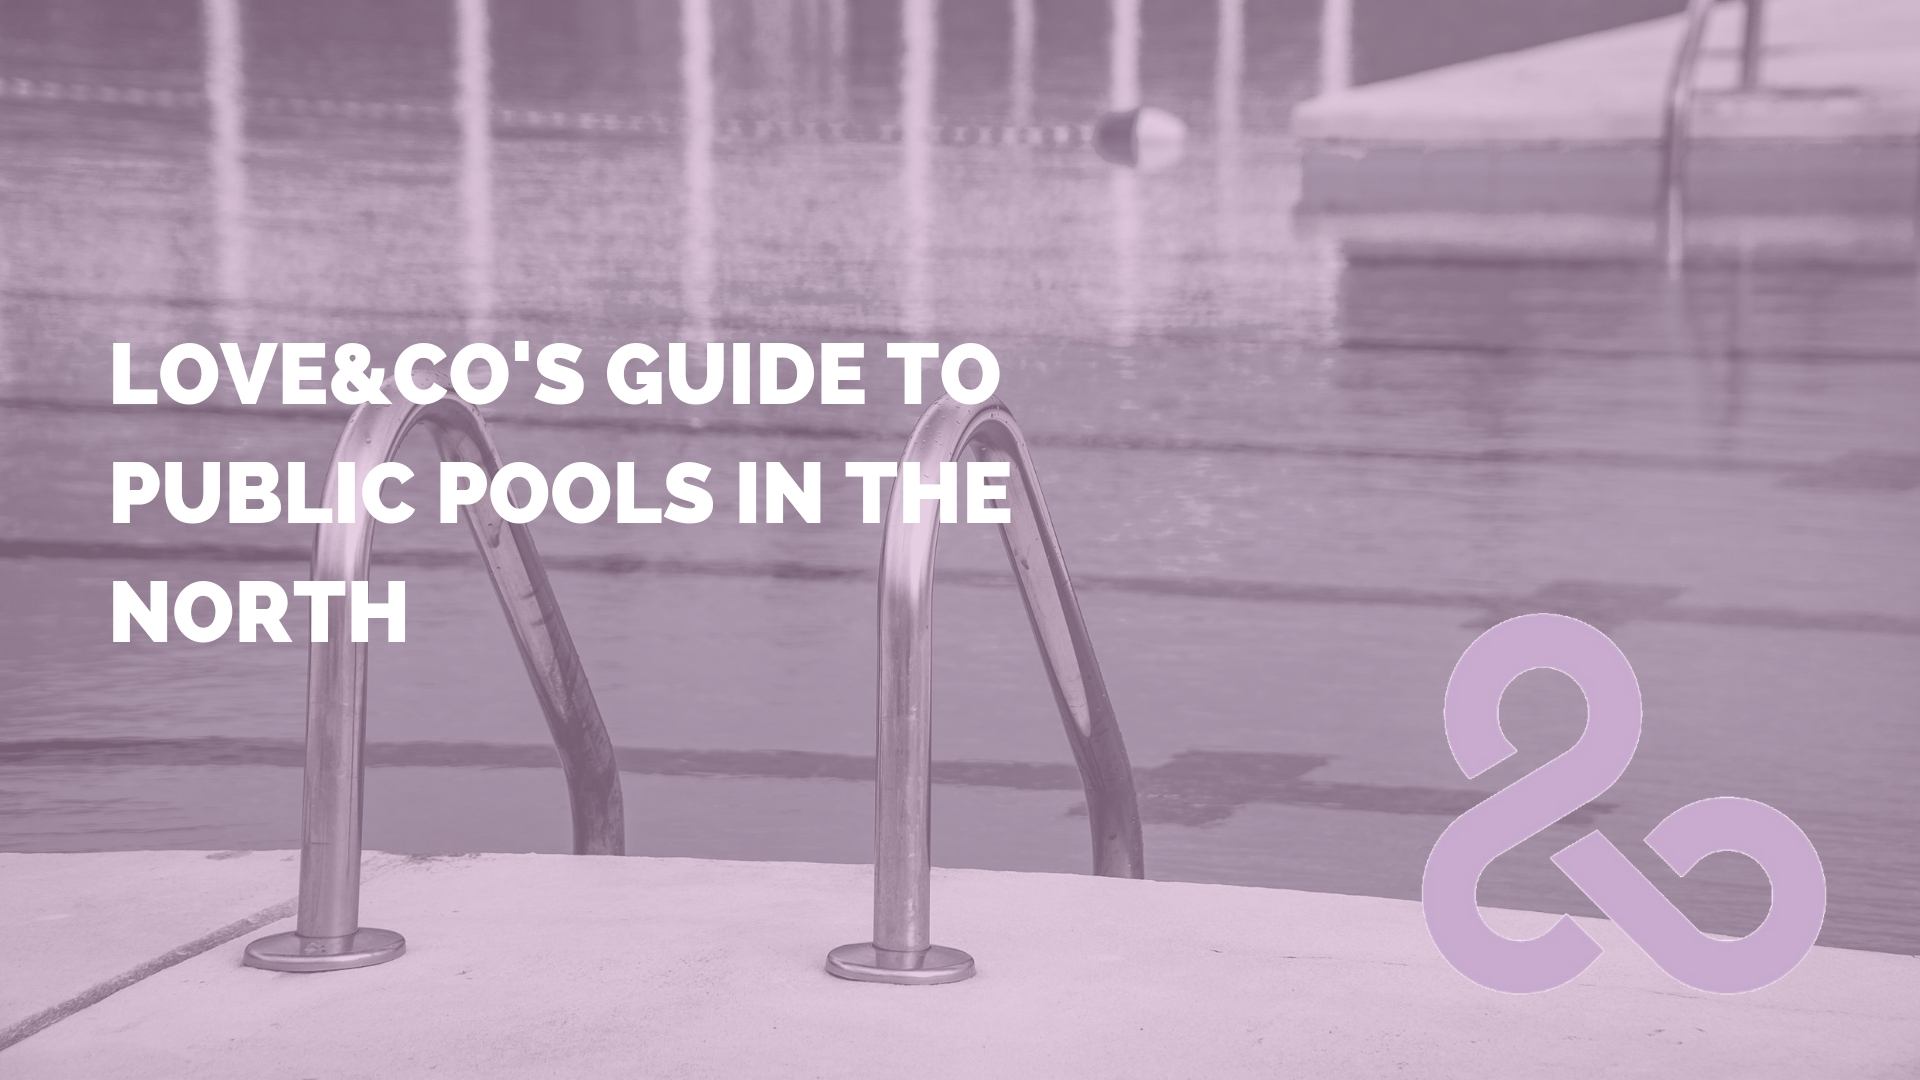 Love&Co's Guide to Public Pools in the North